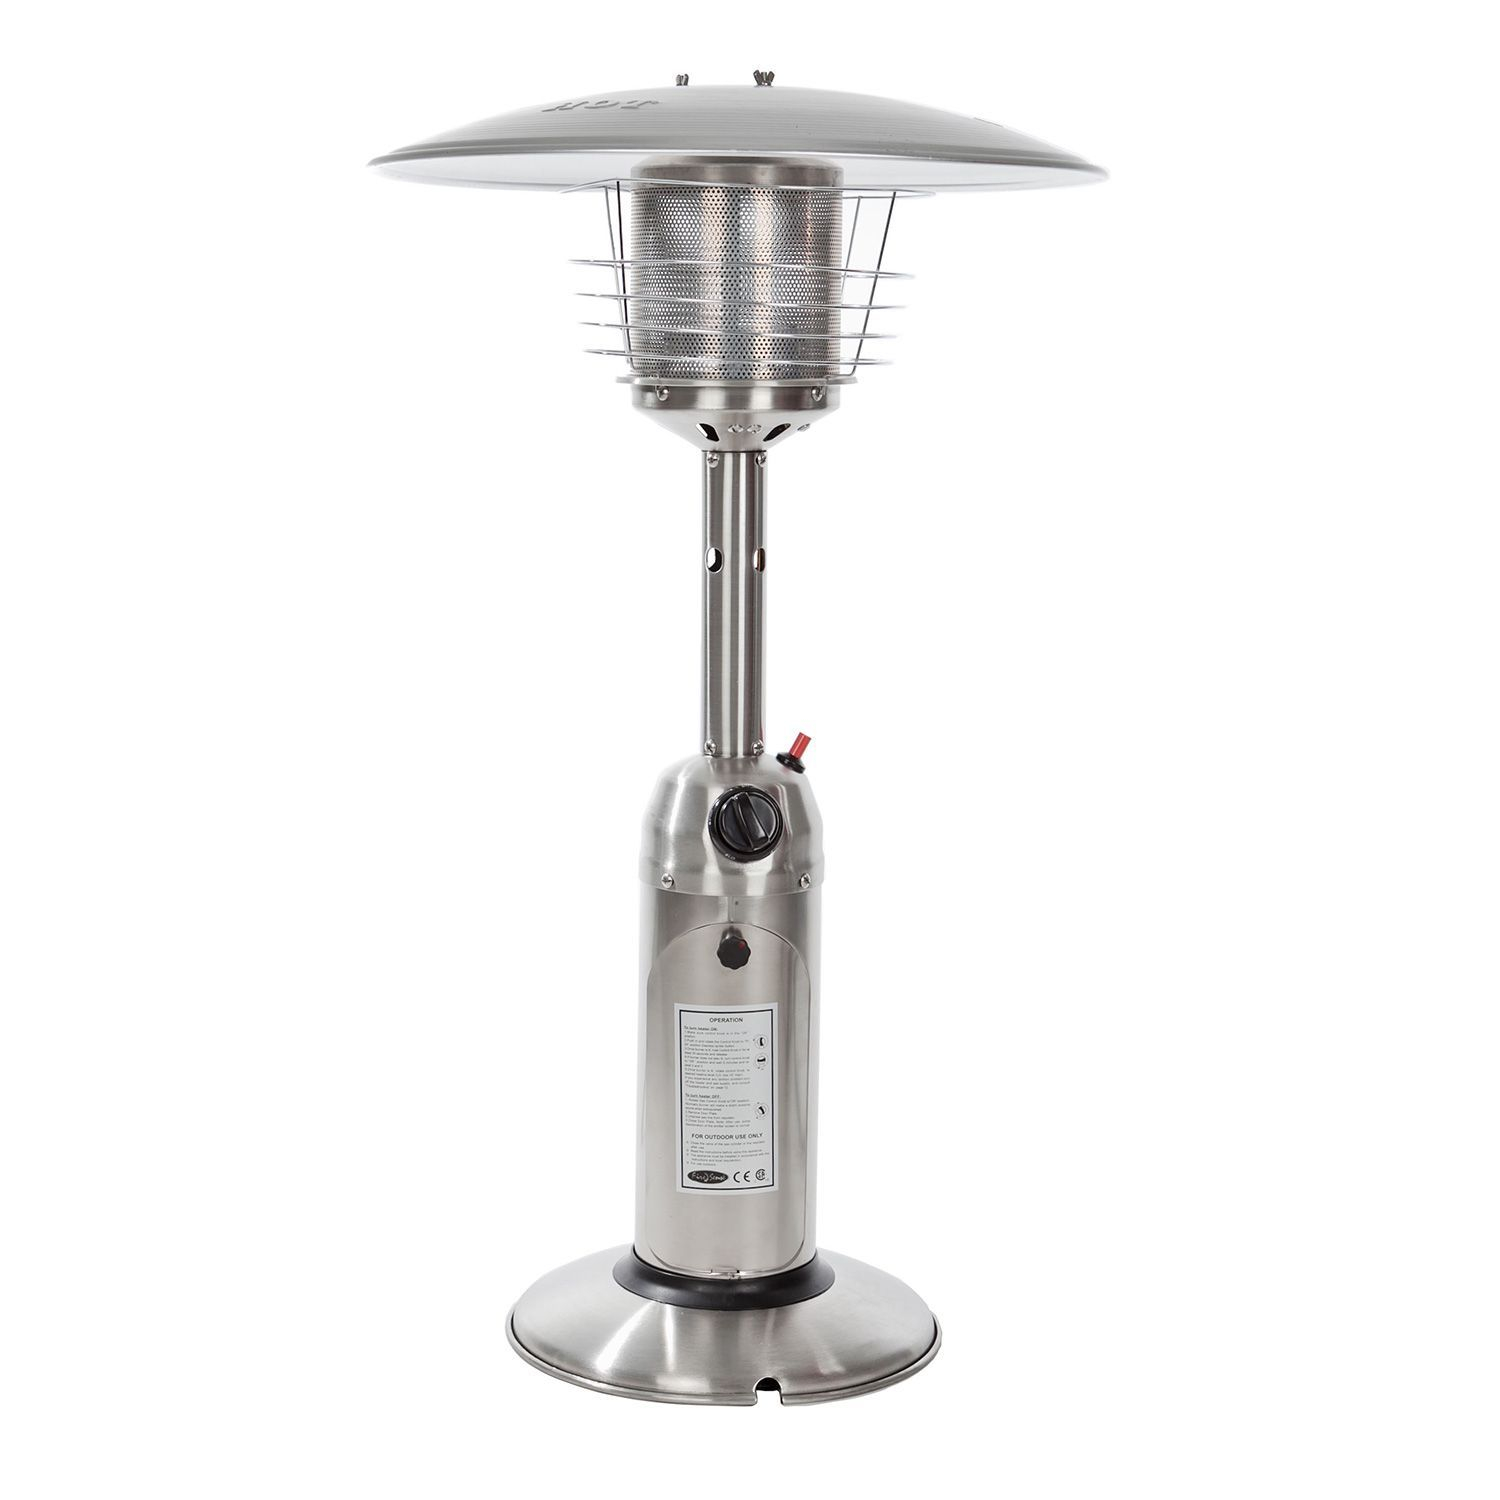 Stainless Steel Table Top Patio Heater Party Ideas in proportions 1500 X 1500